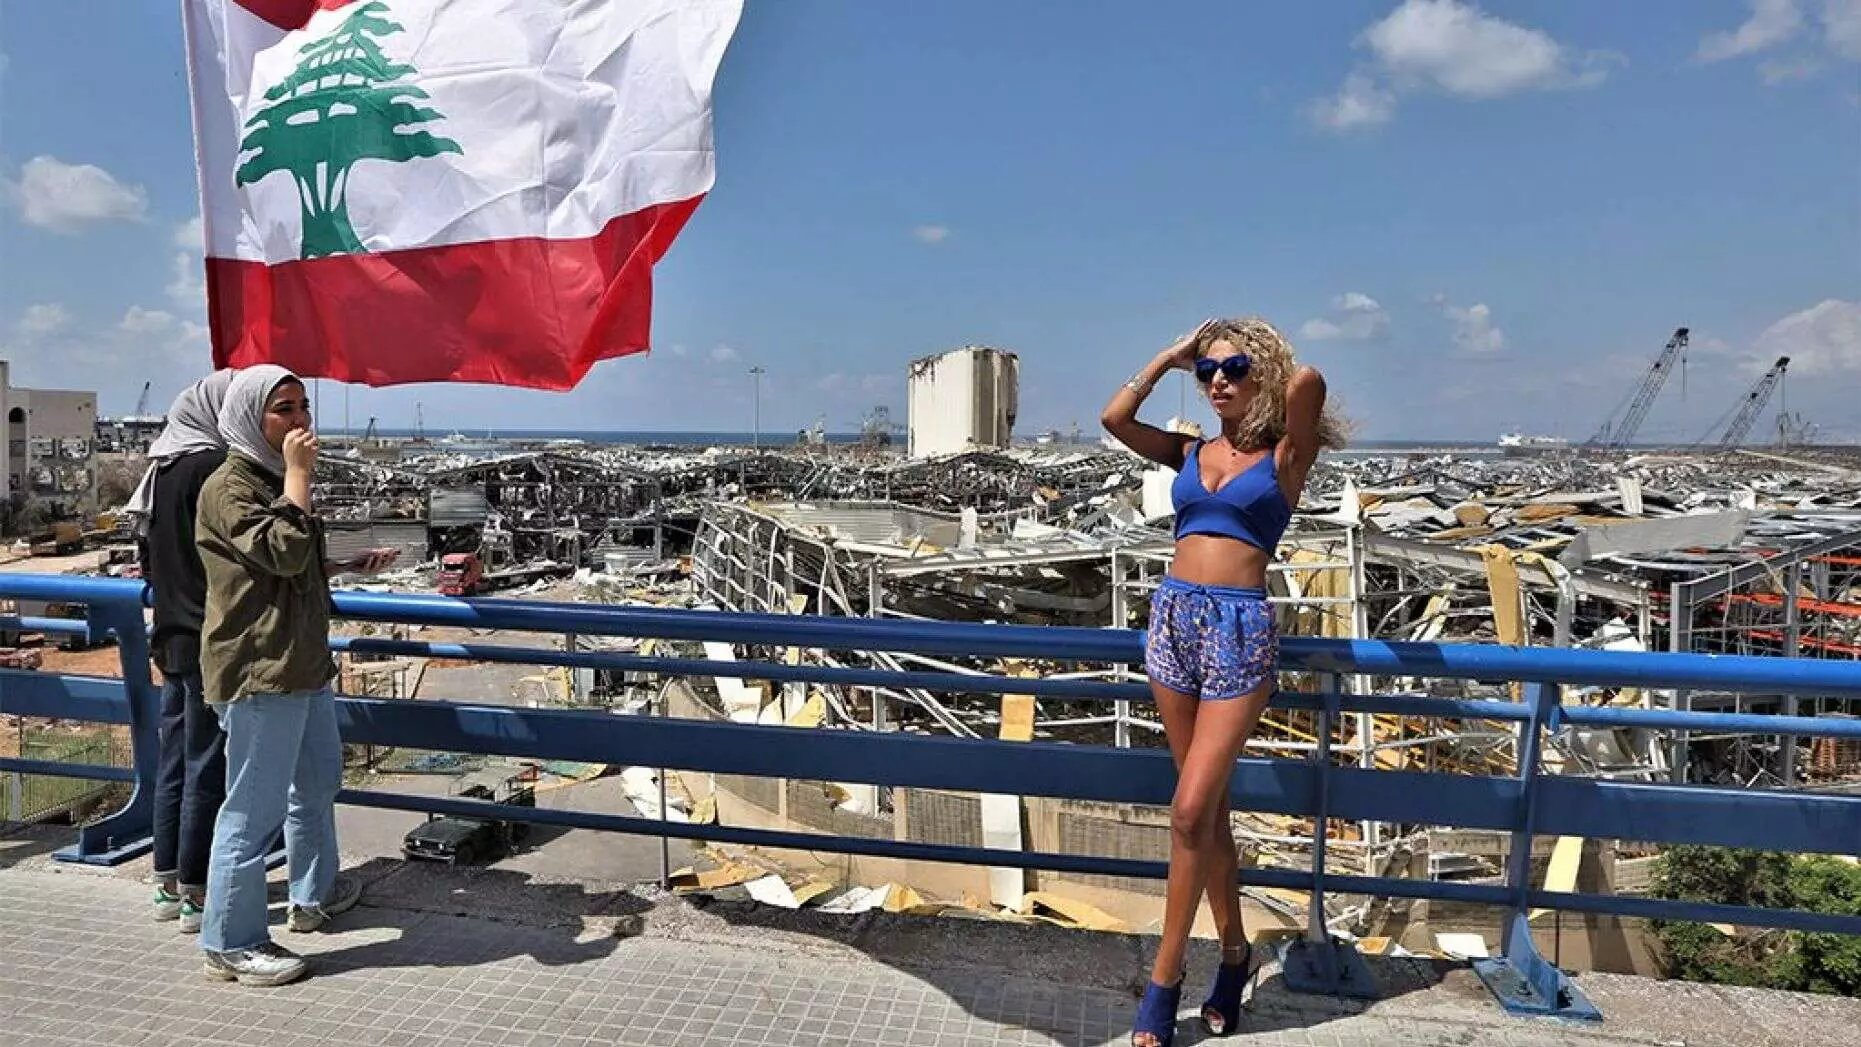 Couple Face Backlash For Photoshoot On Beirut Explosion Site